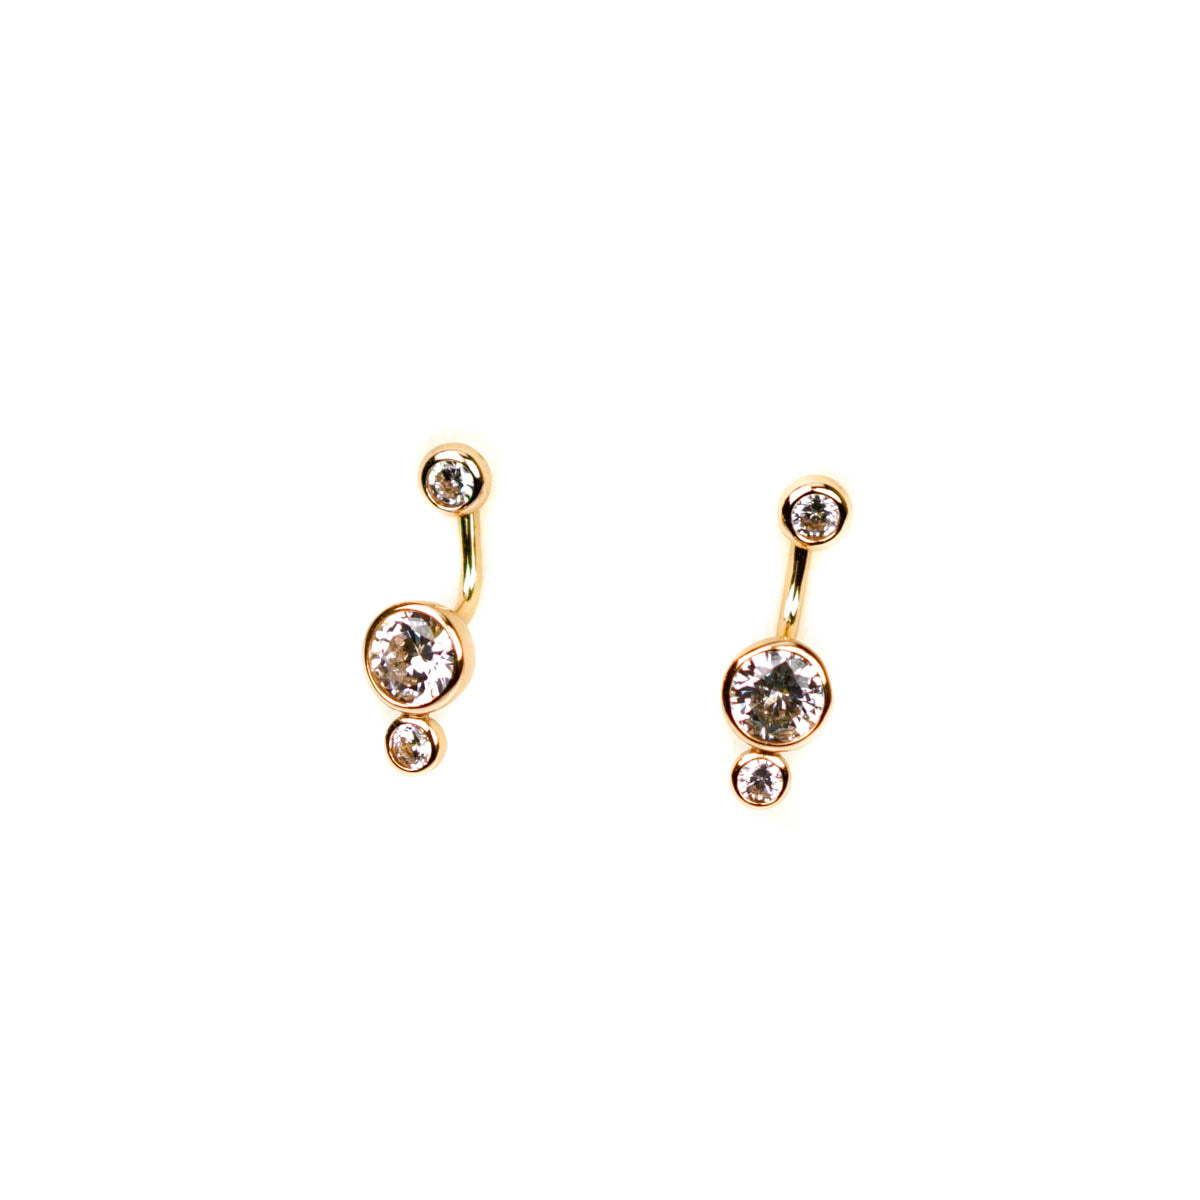 Rose Gold Plated Crystal Stud & Drop Earrings Gift Set Infinity & Co